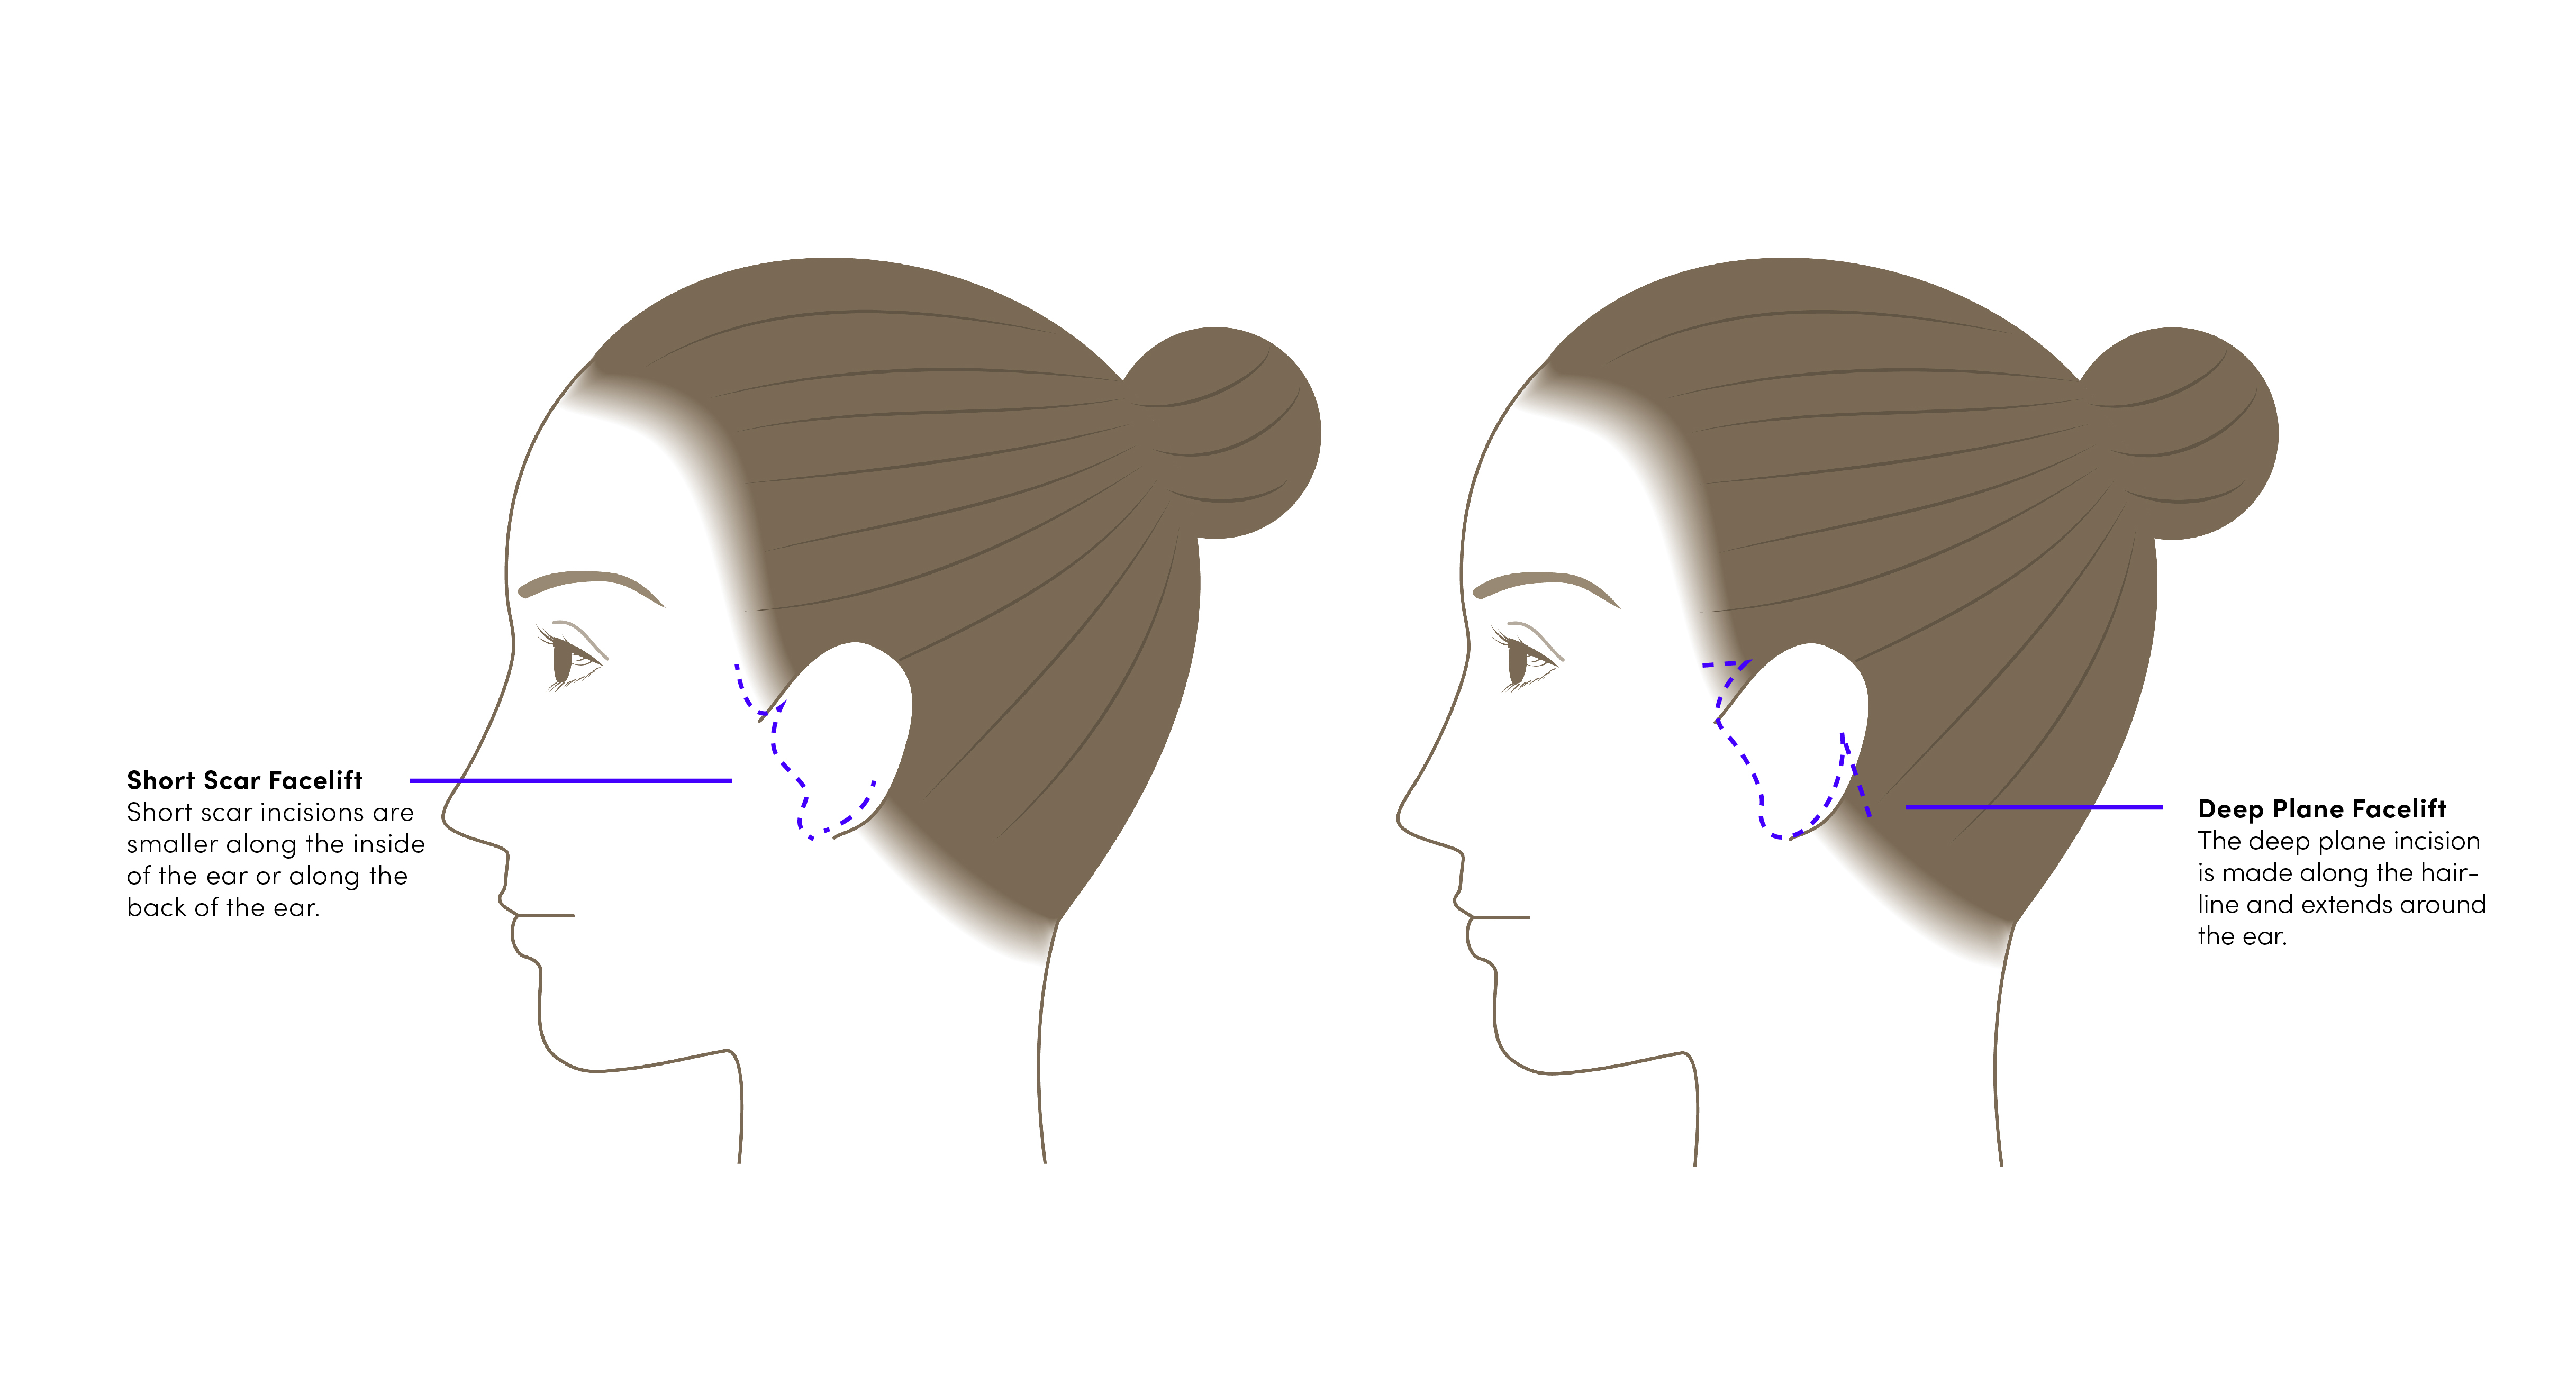 Graphic Showing the Incision for a Short Scar Facelift and Deep Plane Facelift